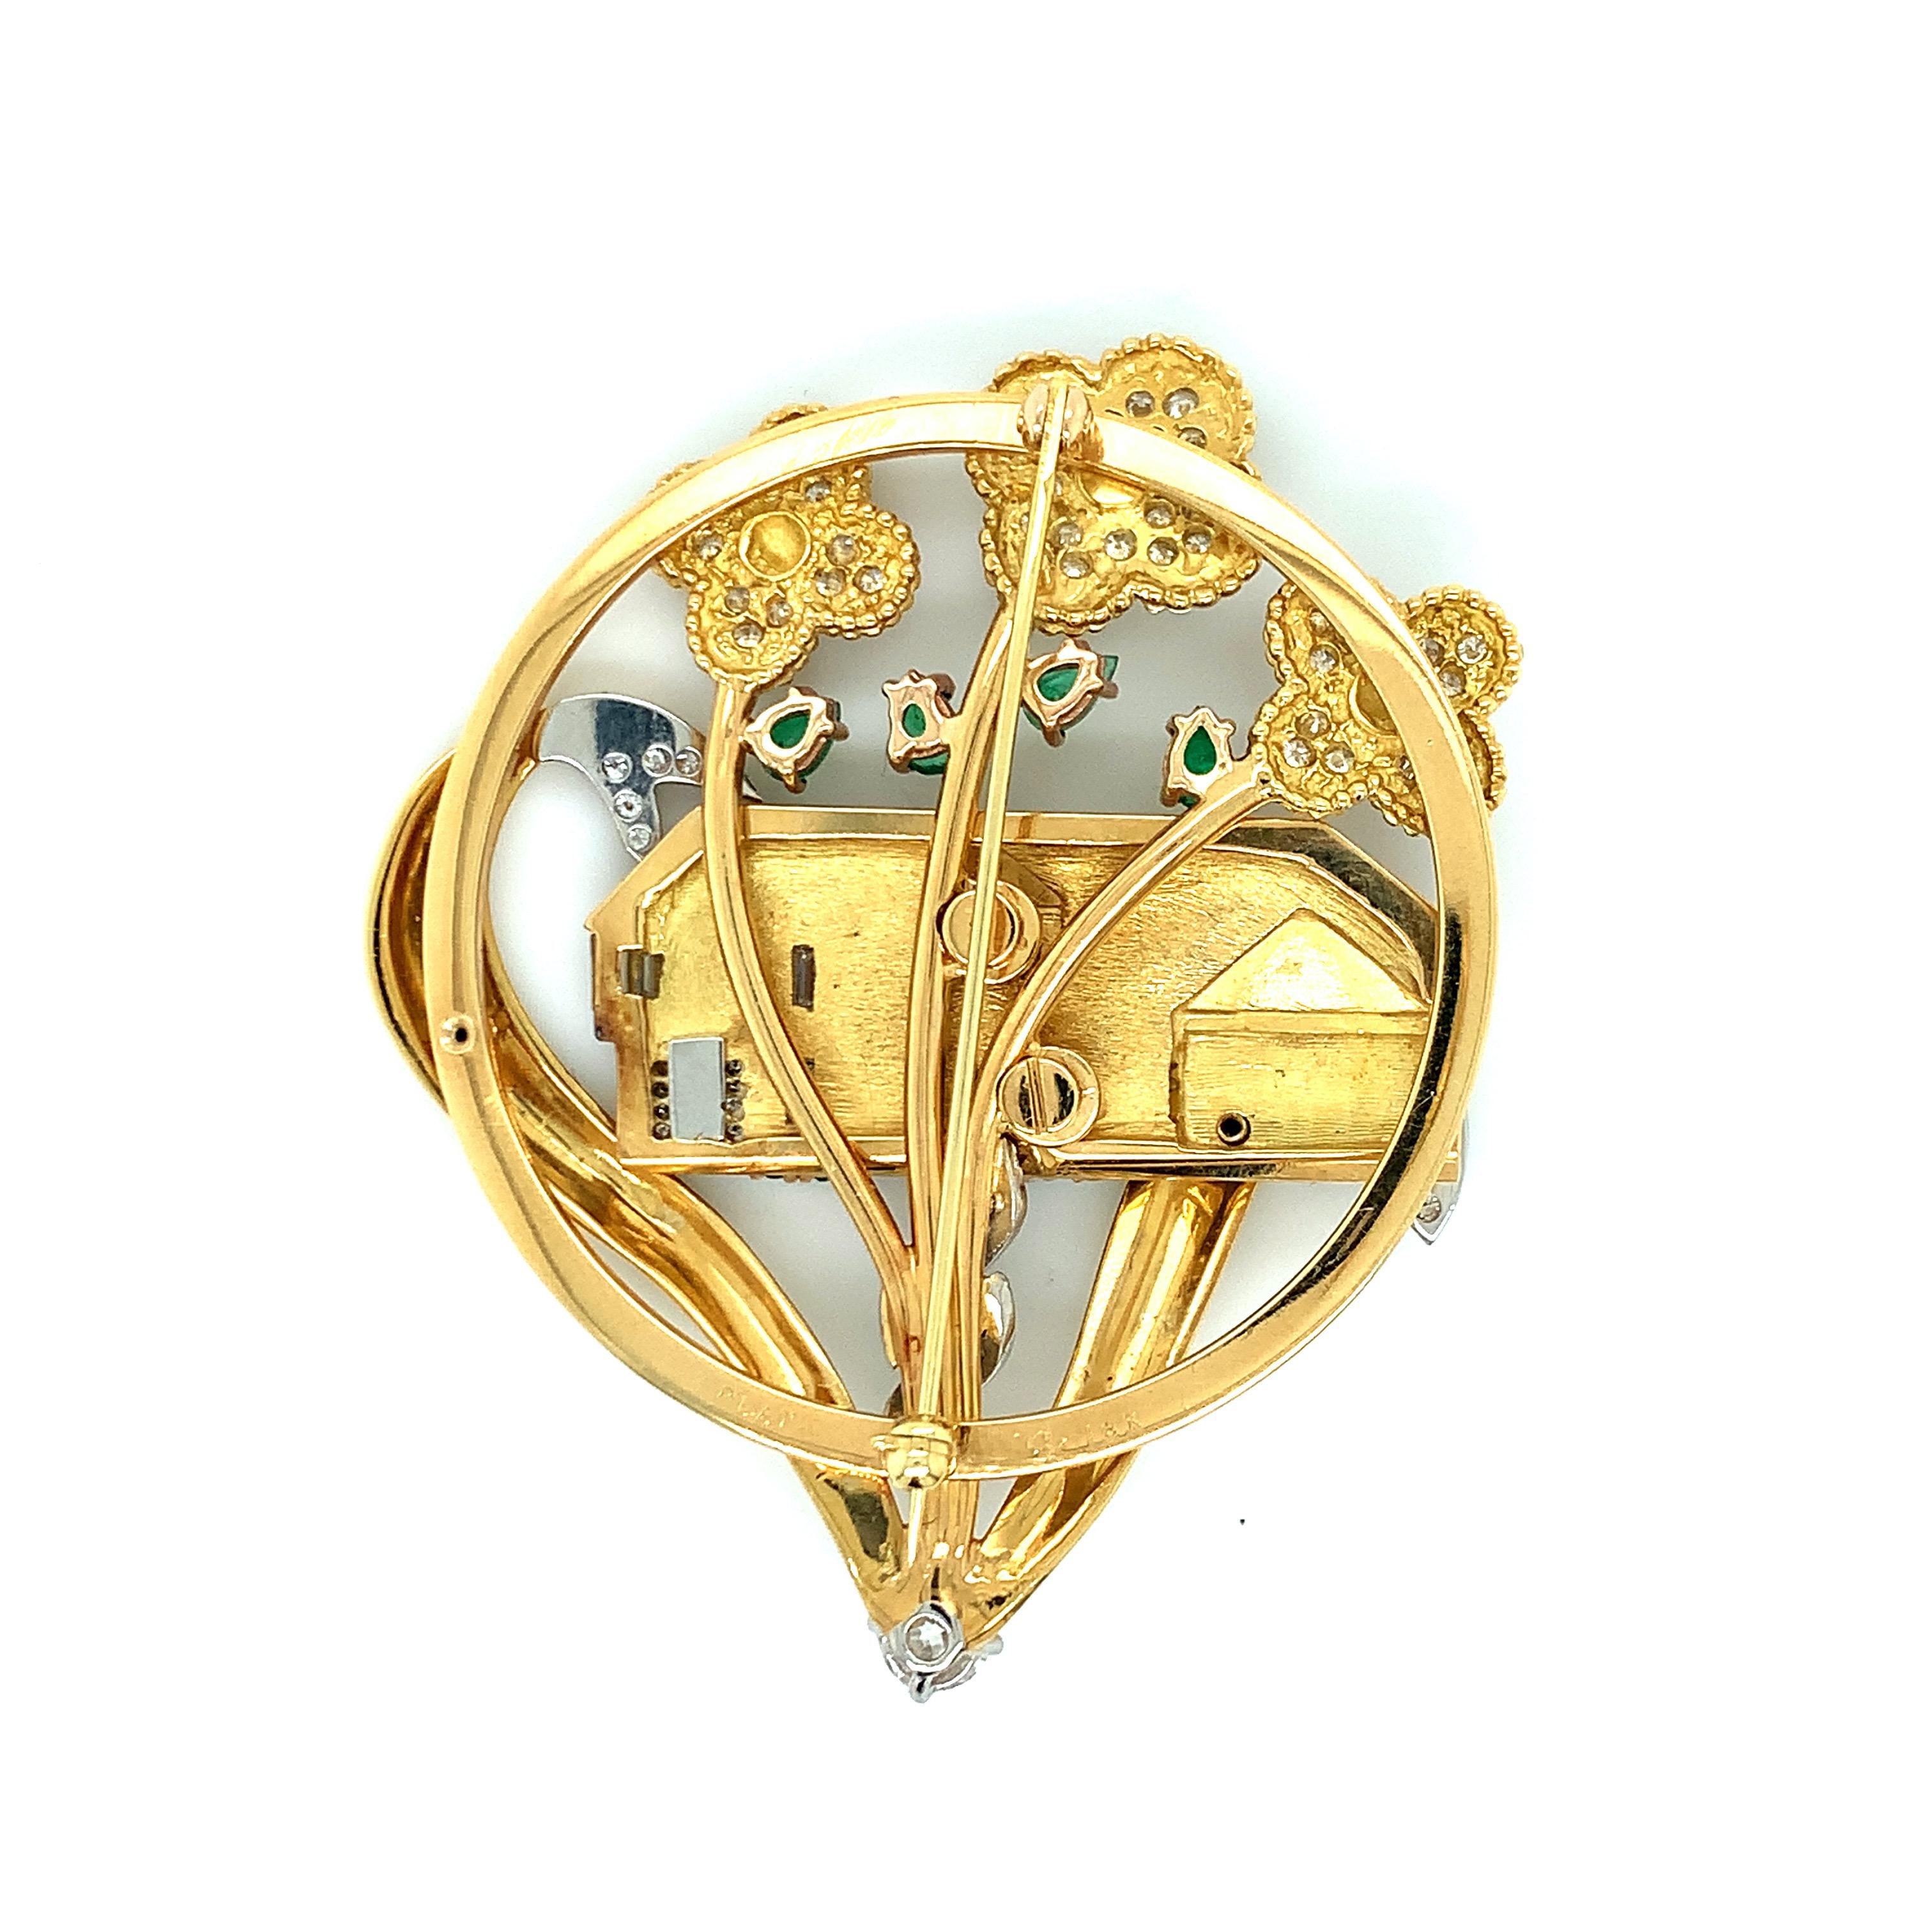 An 18 karat yellow gold brooch featuring a two-story house encircled by flowers with diamonds. There are a total of 74 round cut diamonds and 10 baguette cut diamonds that weigh approximately 1.45 carat. The 1 old European cut diamond weighs